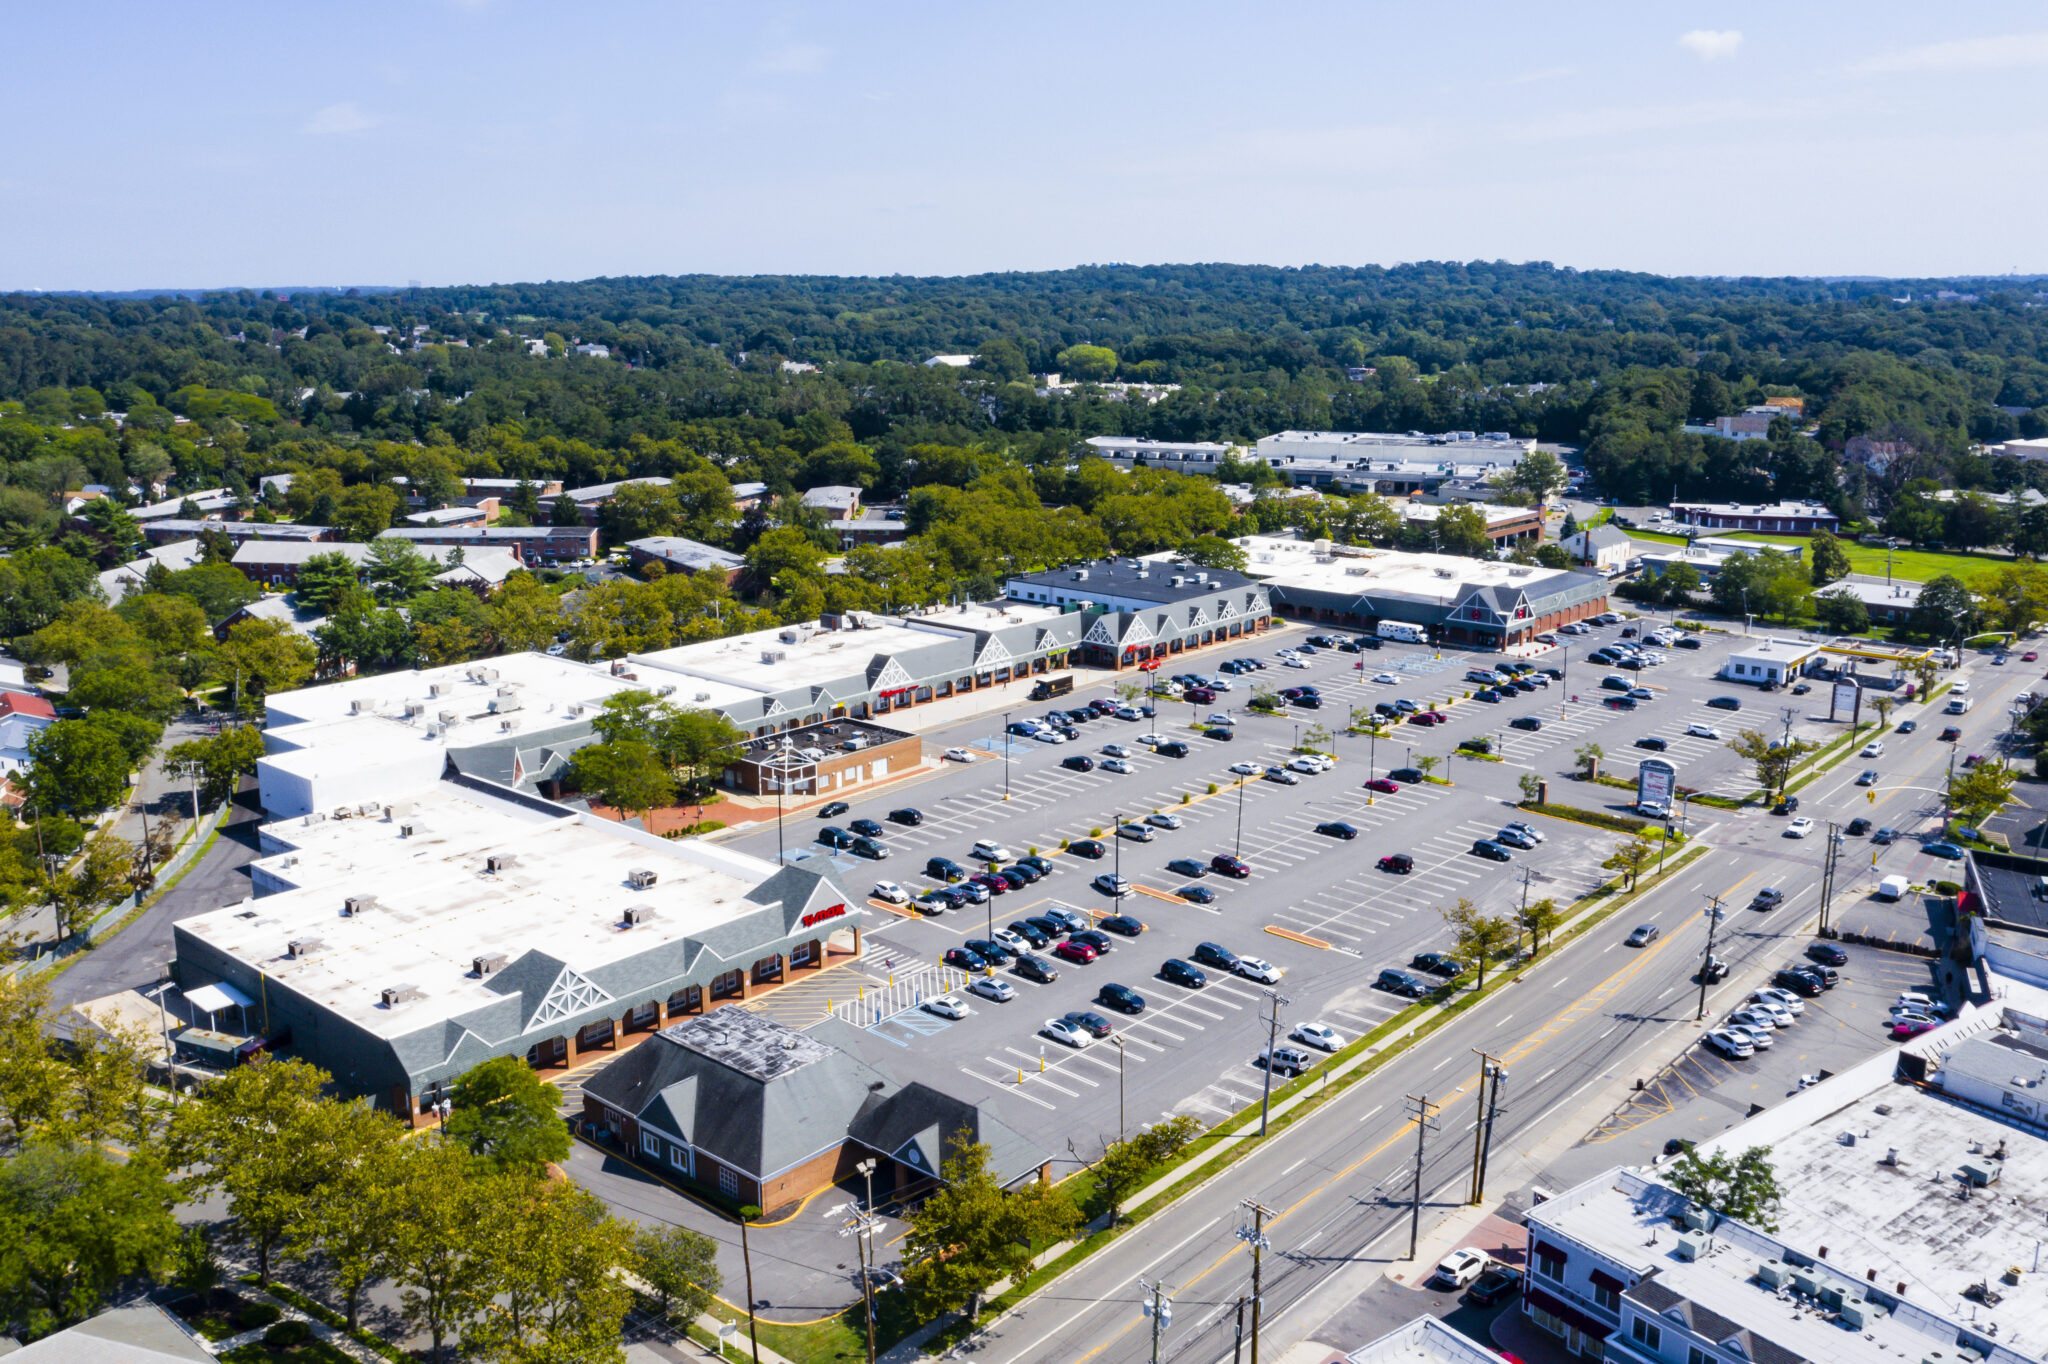 PEBB Enterprises, Sagamore Hill Secure Leases with Starbucks, Additional Exciting Tenants at Soundview Marketplace